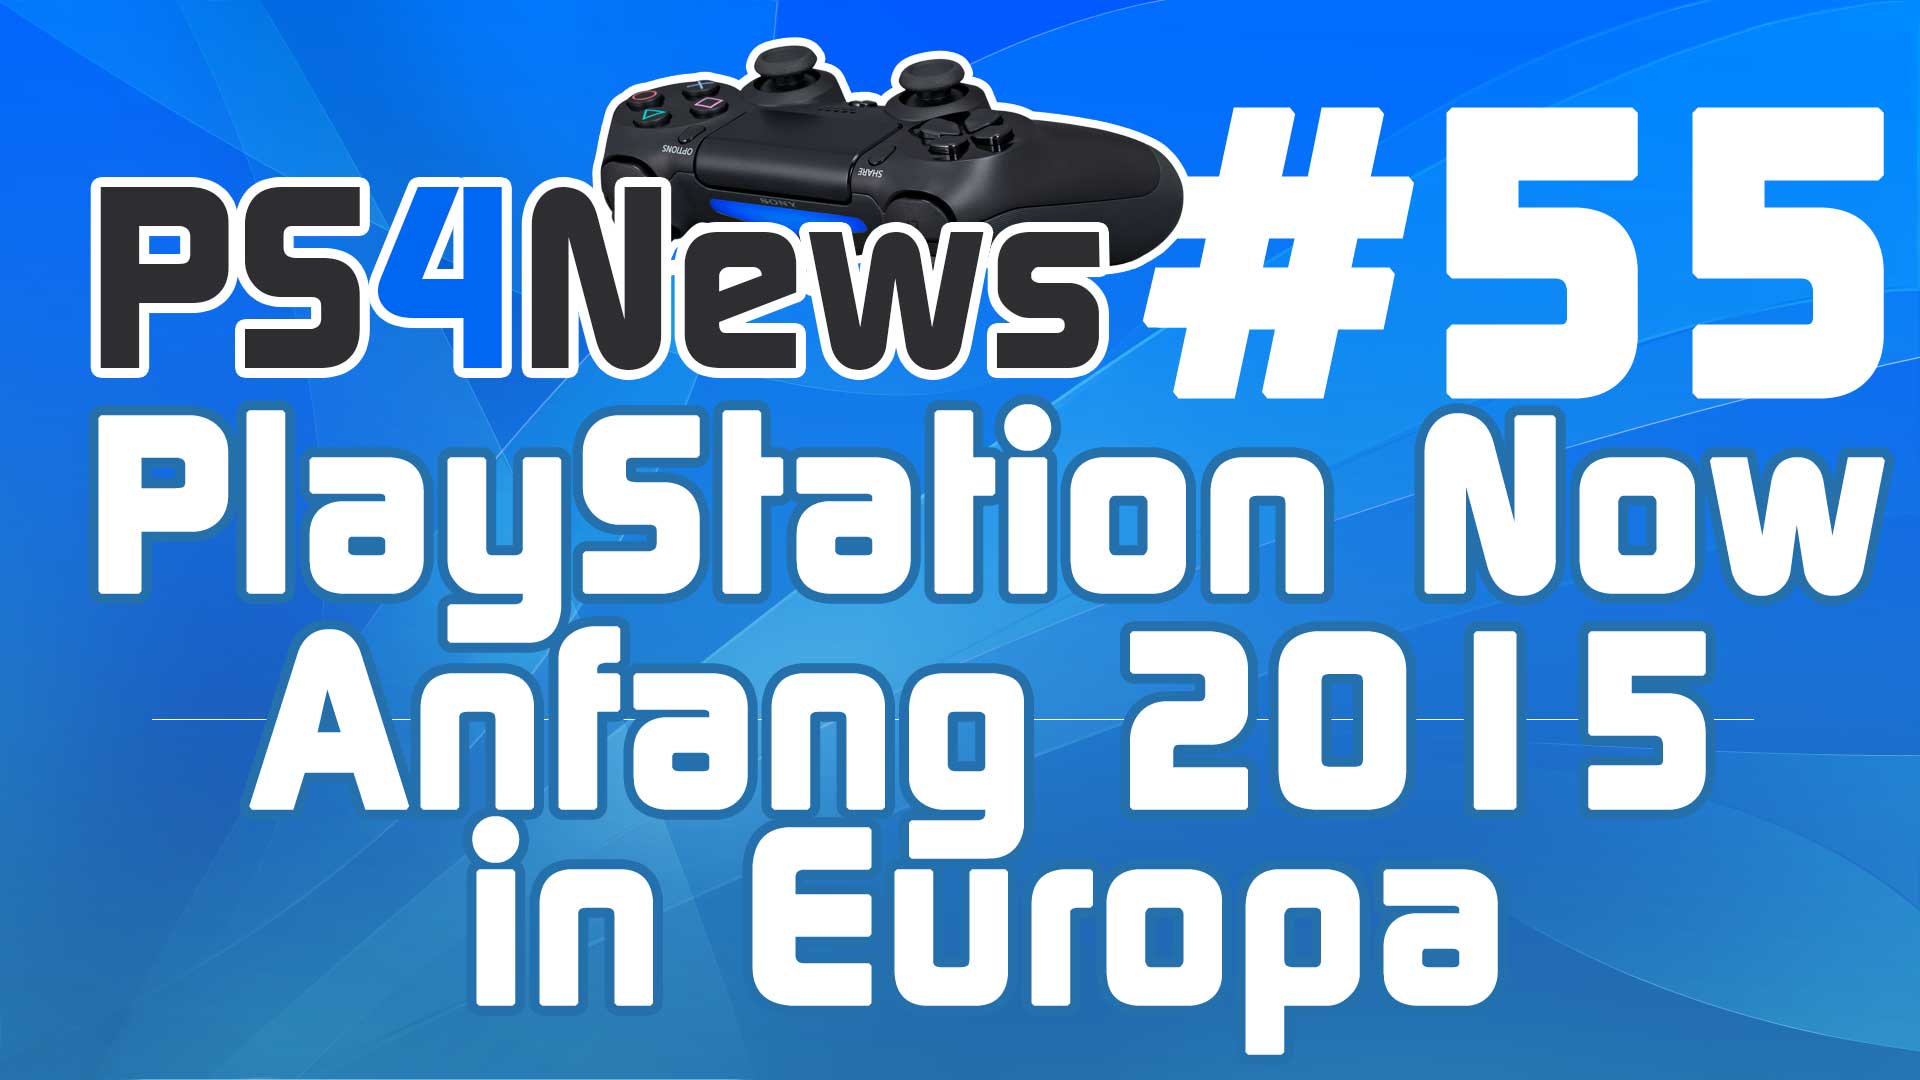 PlayStation Now Anfang 2015 in Europa – PS4 Verkaufszahlen